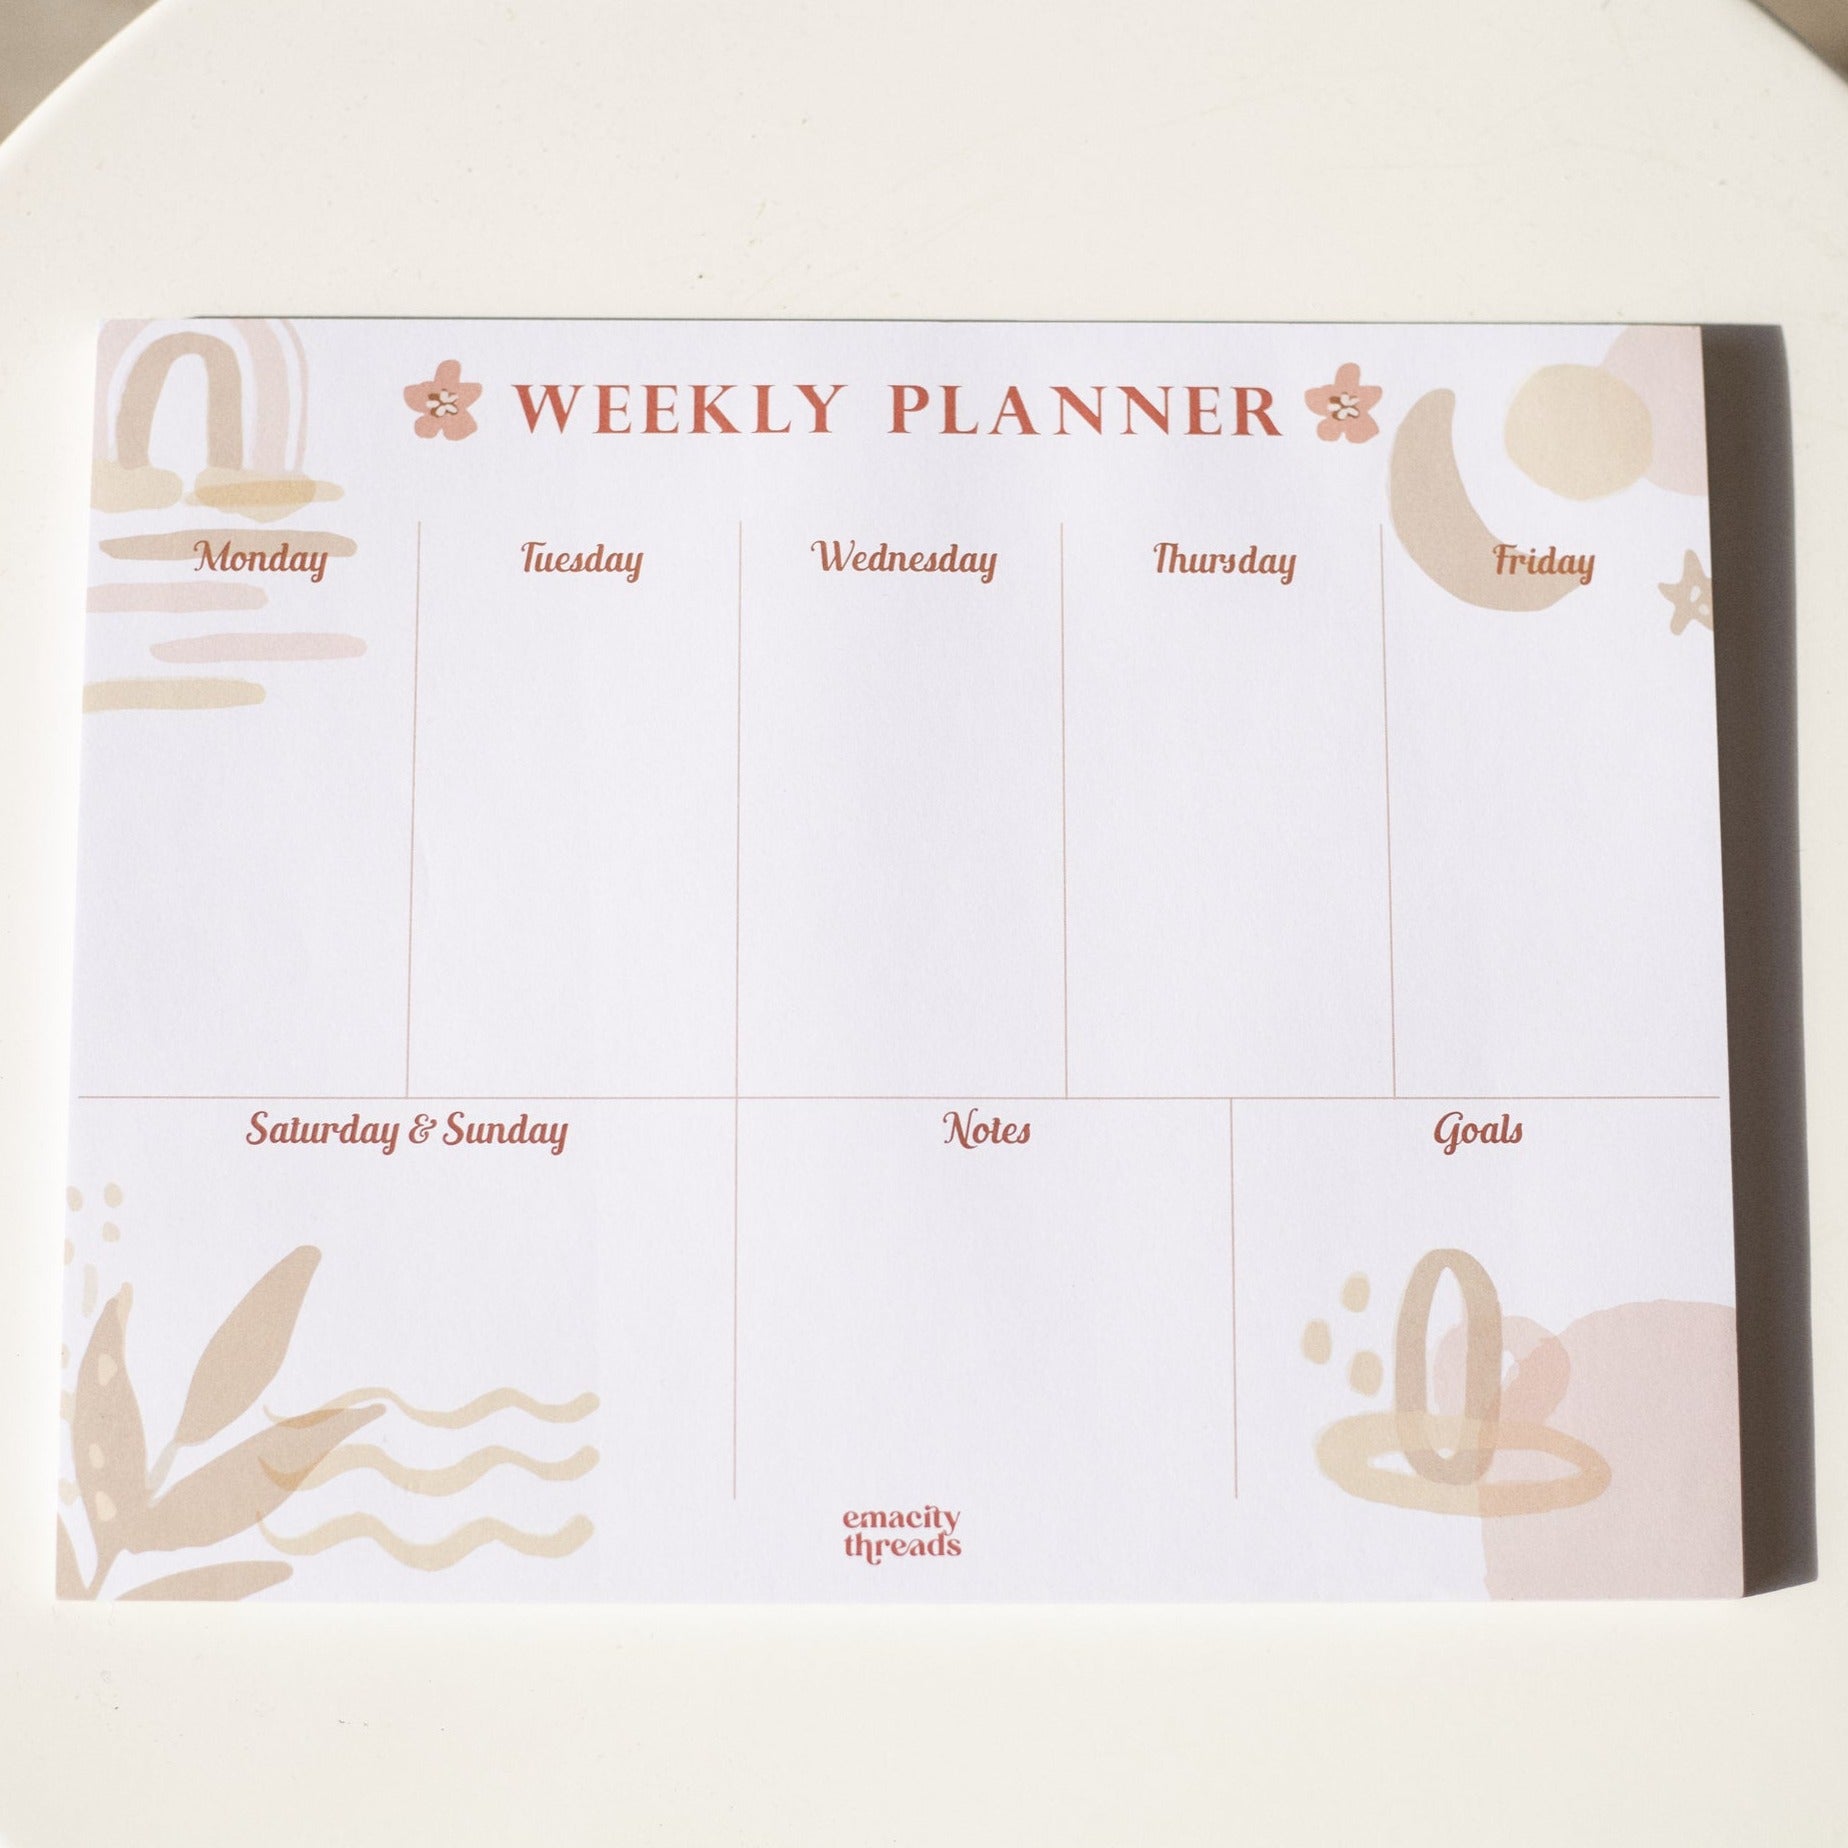 Weekly Planner - Emacity Threads